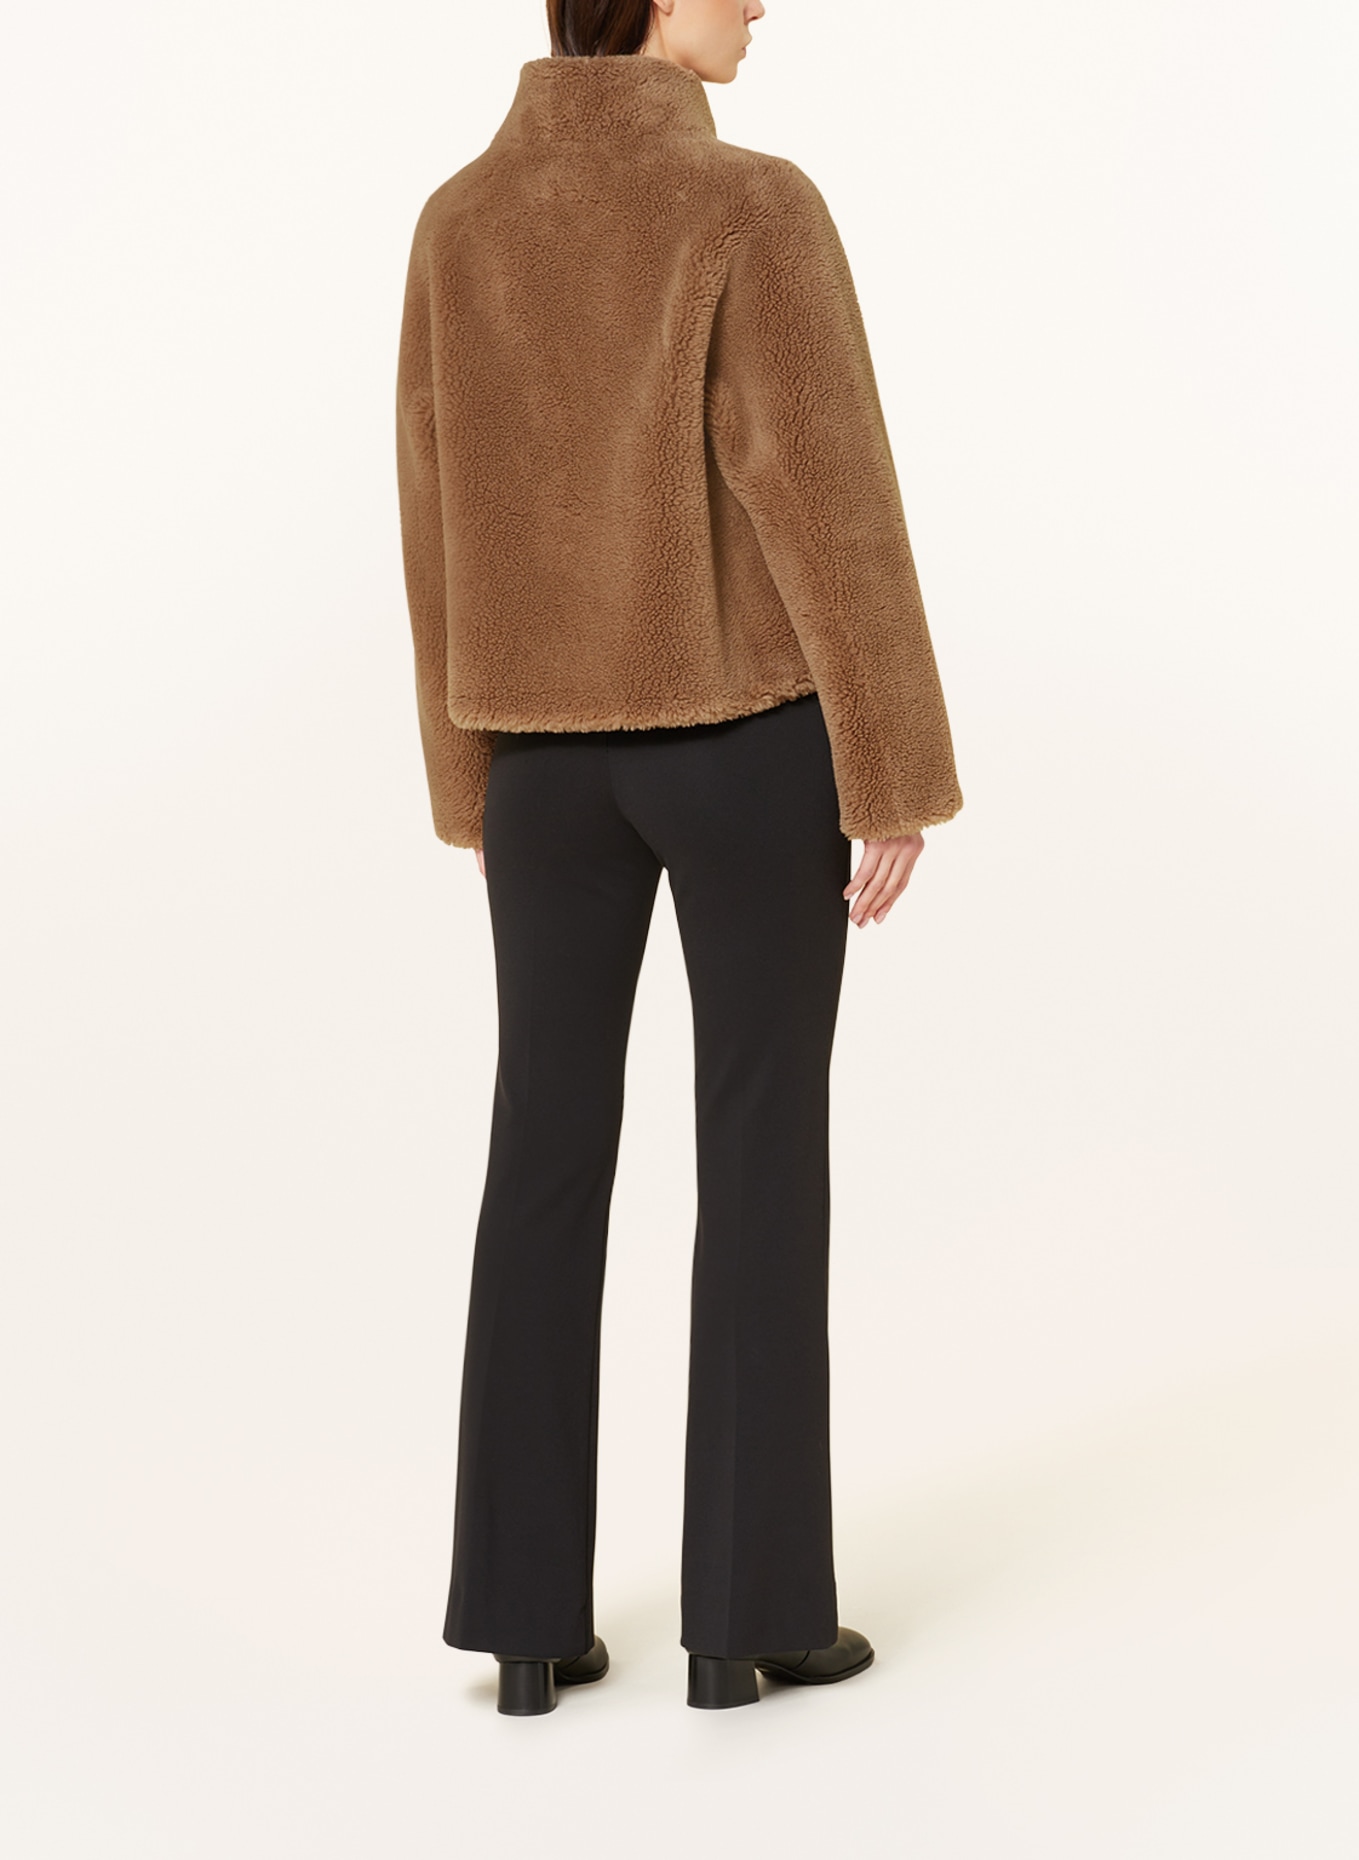 REPEAT Reversible teddy jacket, Color: CAMEL (Image 4)